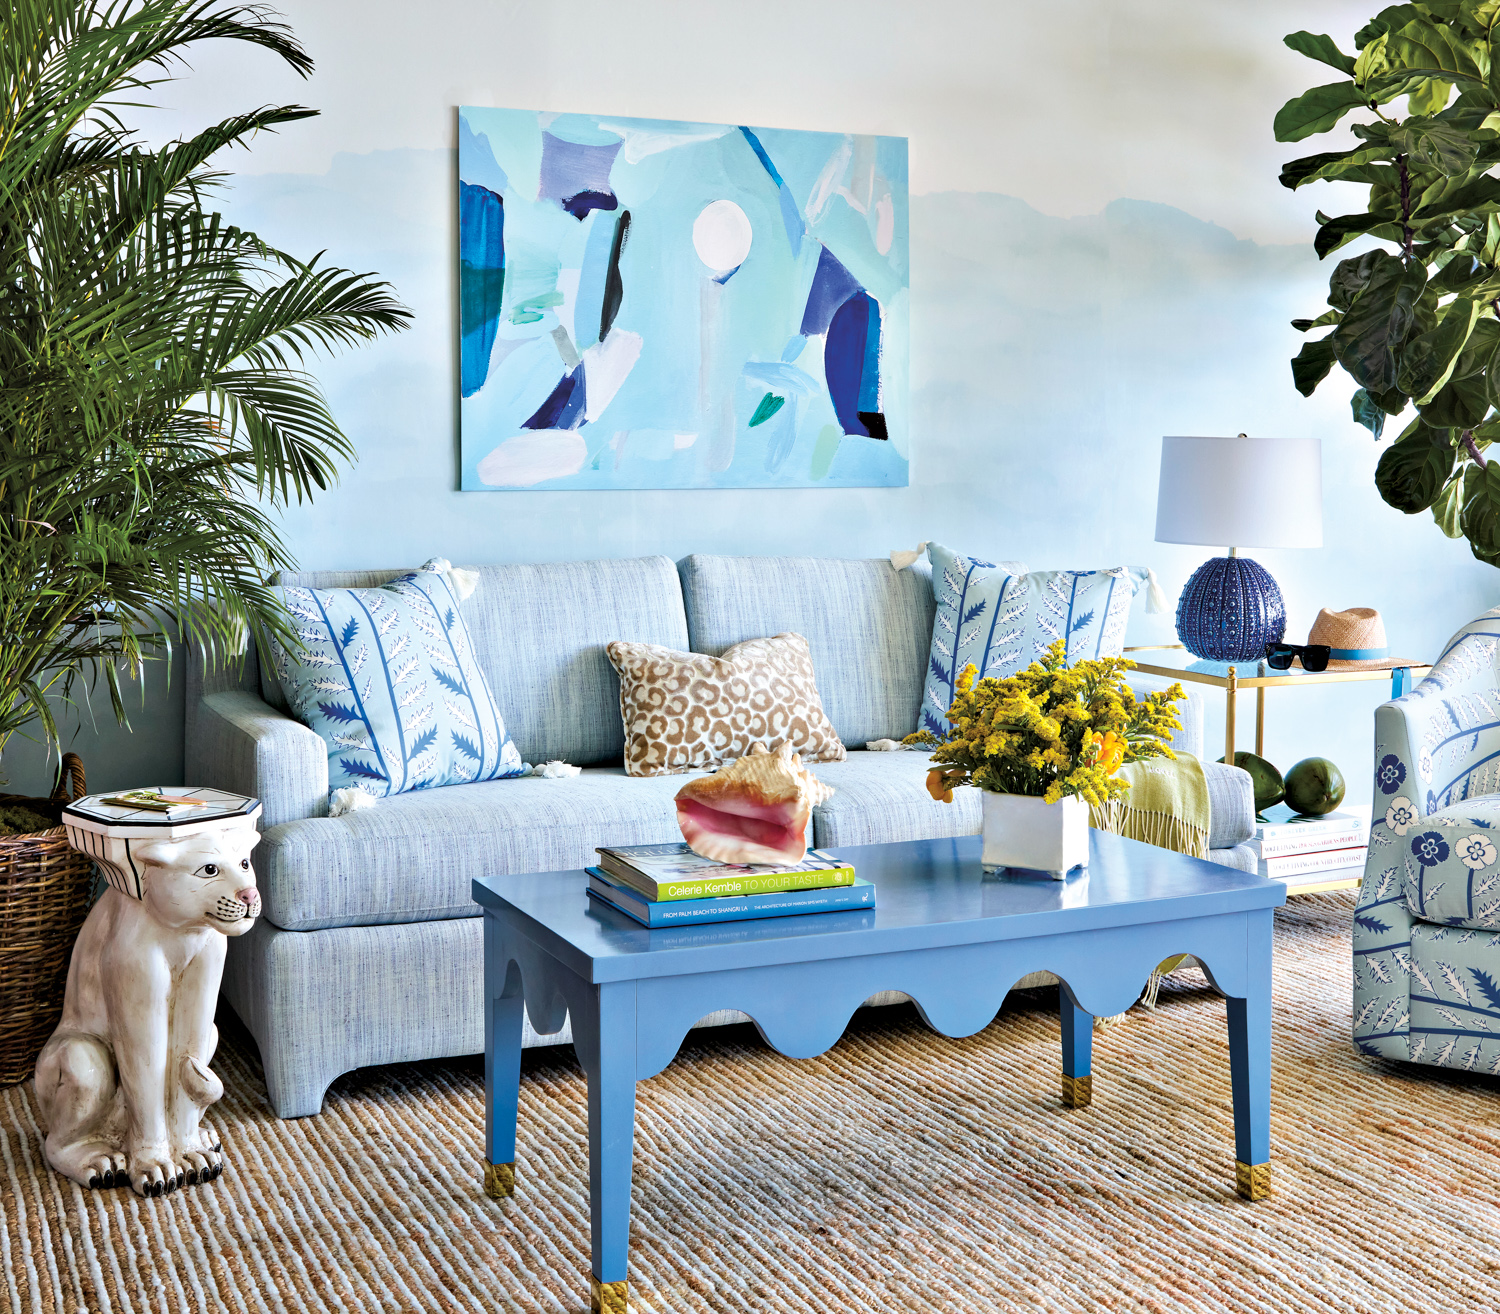 large plants flank suite living space with blue sofa, table lamp, armchair, table, walls and artwork